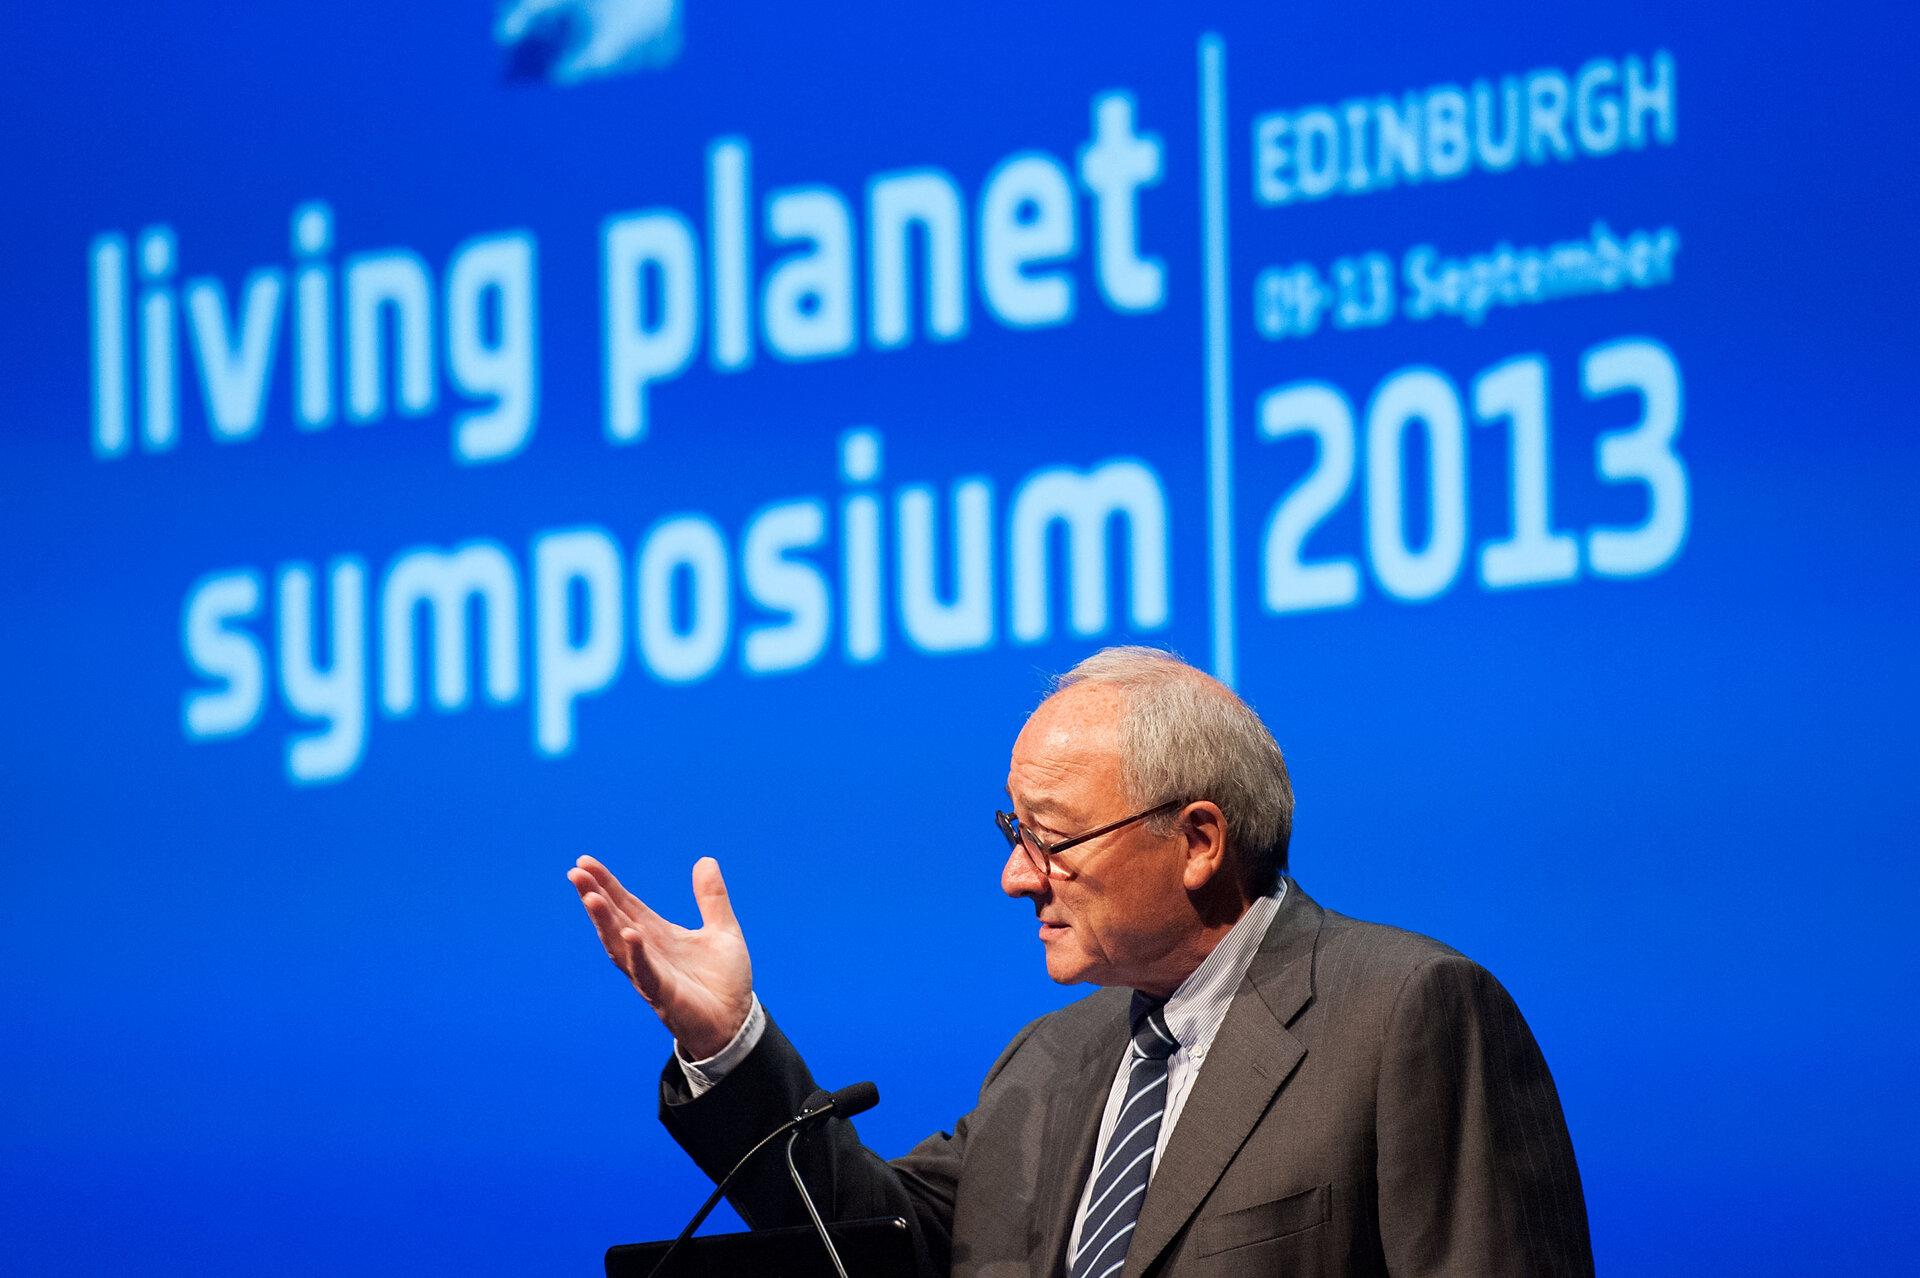 DG's opening speech at the Living Planet Symposium 2013 